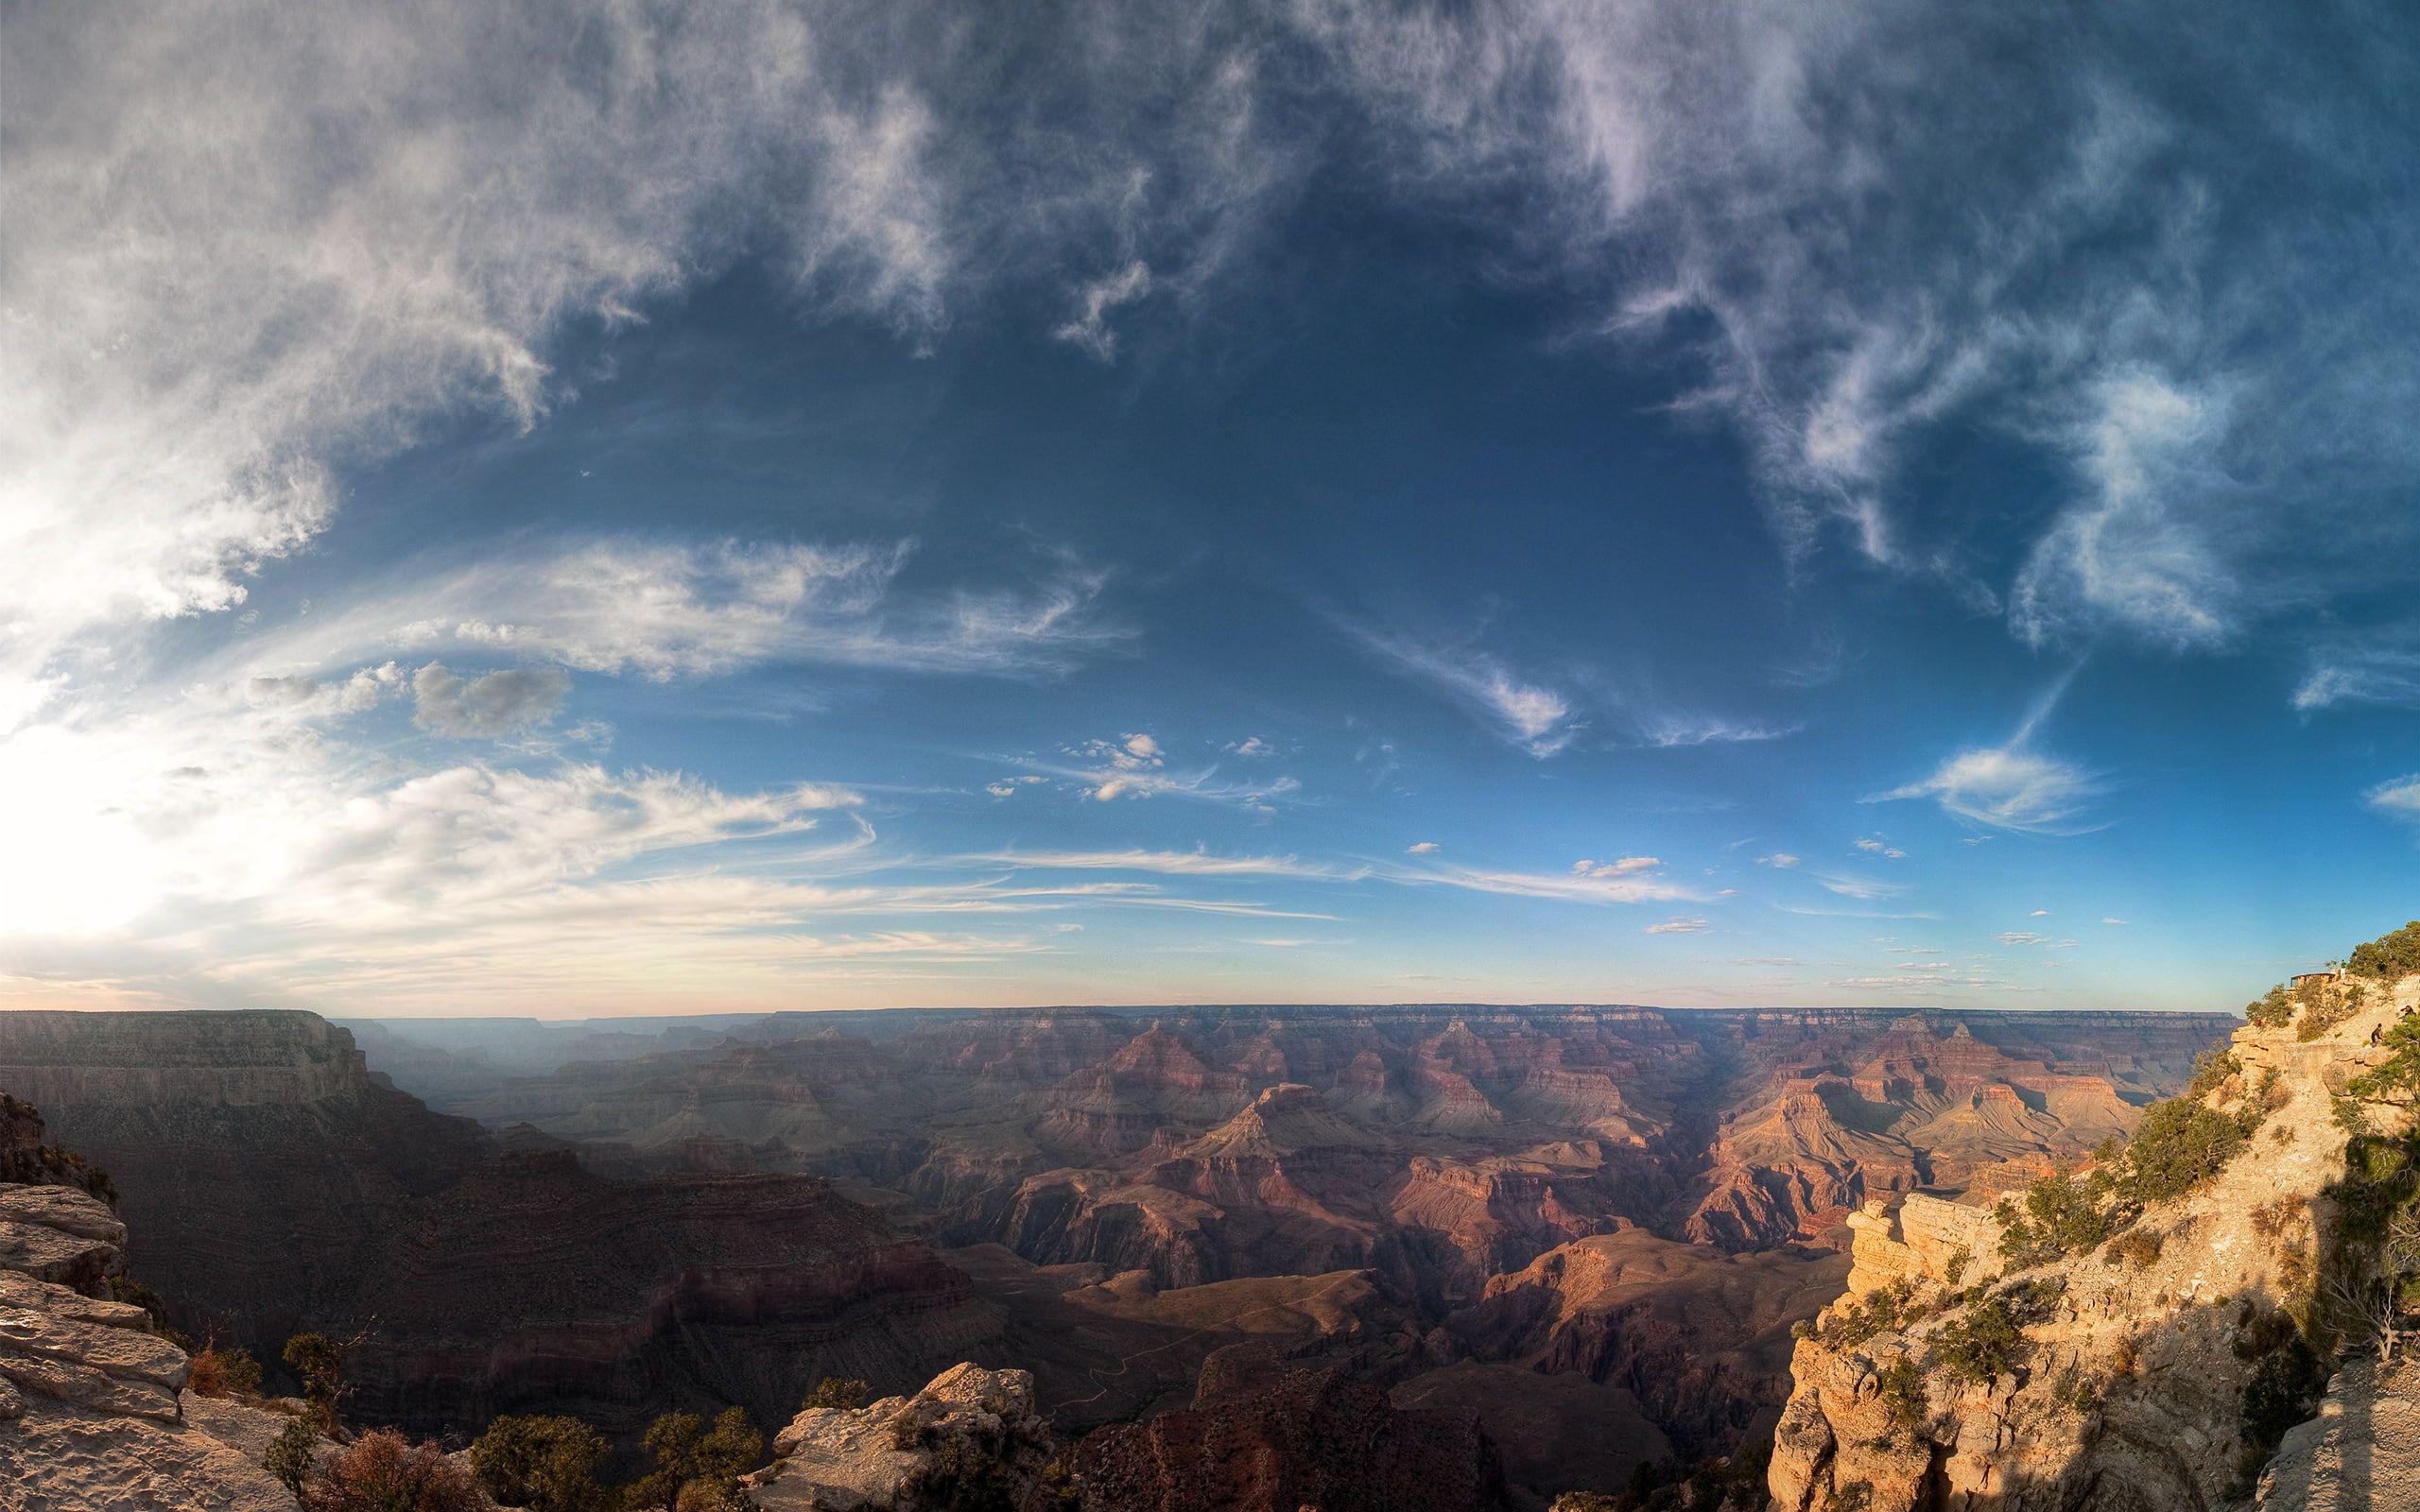 View of the grand canyon HD wallpaper free download